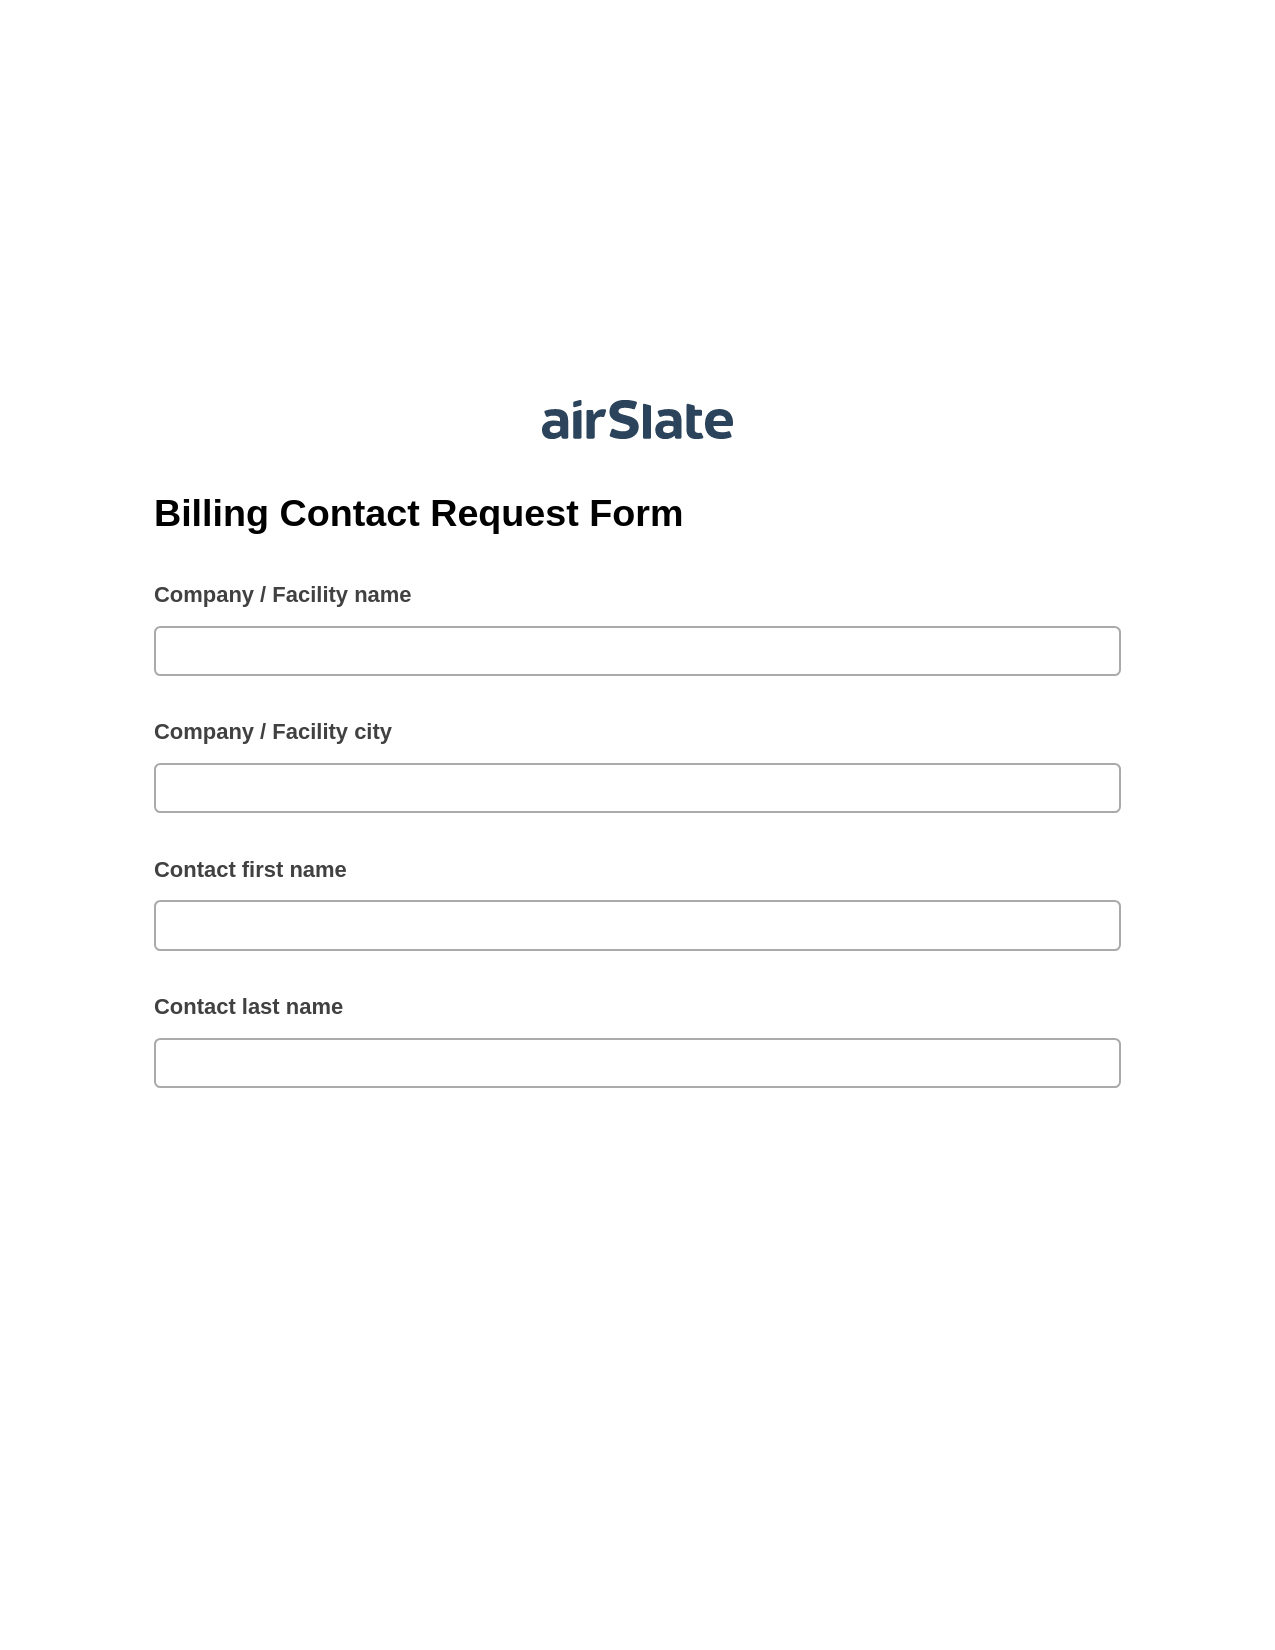 Billing Contact Request Form Pre-fill from MySQL Bot, Lock the slate bot, Export to MySQL Bot